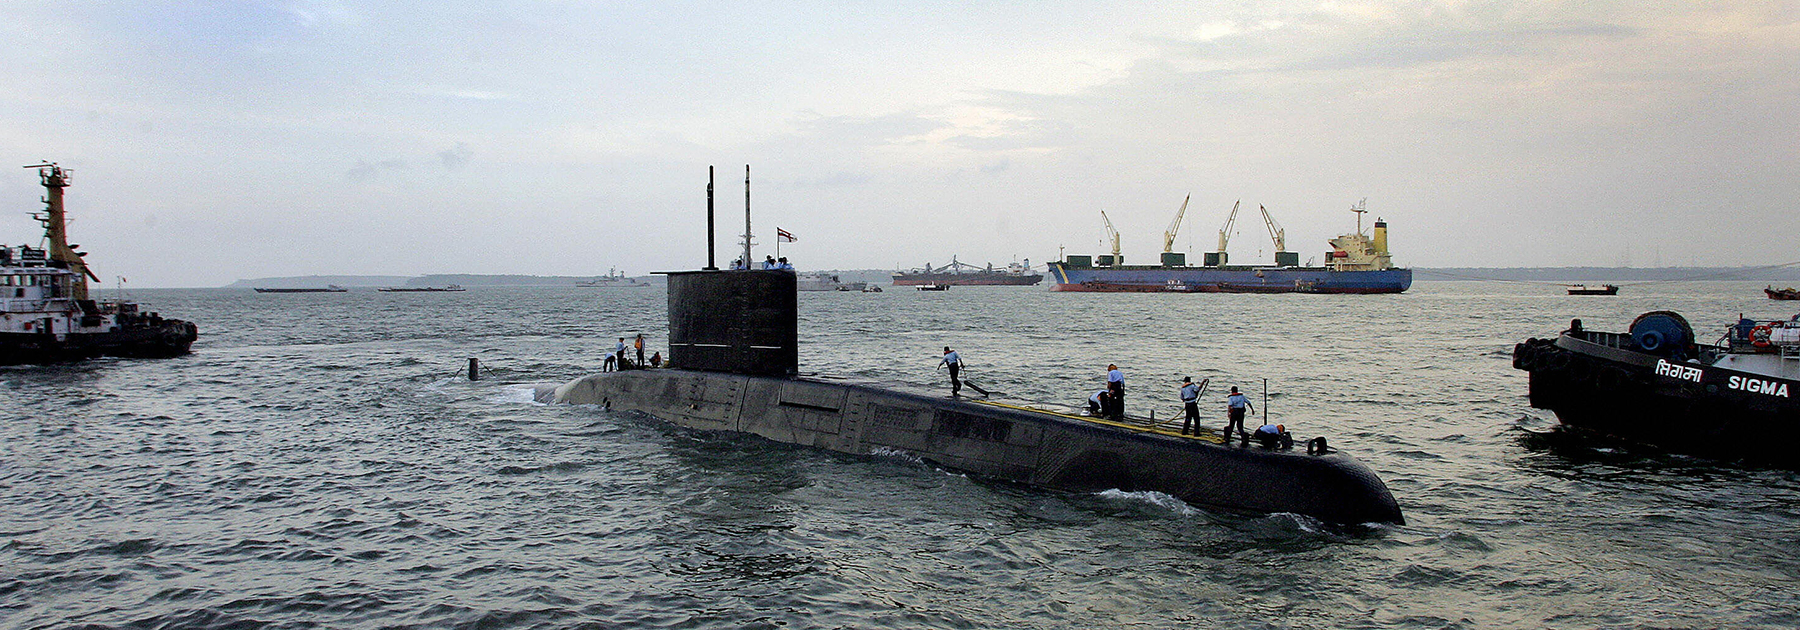 The submarine ‘INS Shalki’ leaves port during the ongoing joint Indo-US naval excercise September 28, 2005. (SEBASTIAN D’SOUZA/AFP/Getty Images)